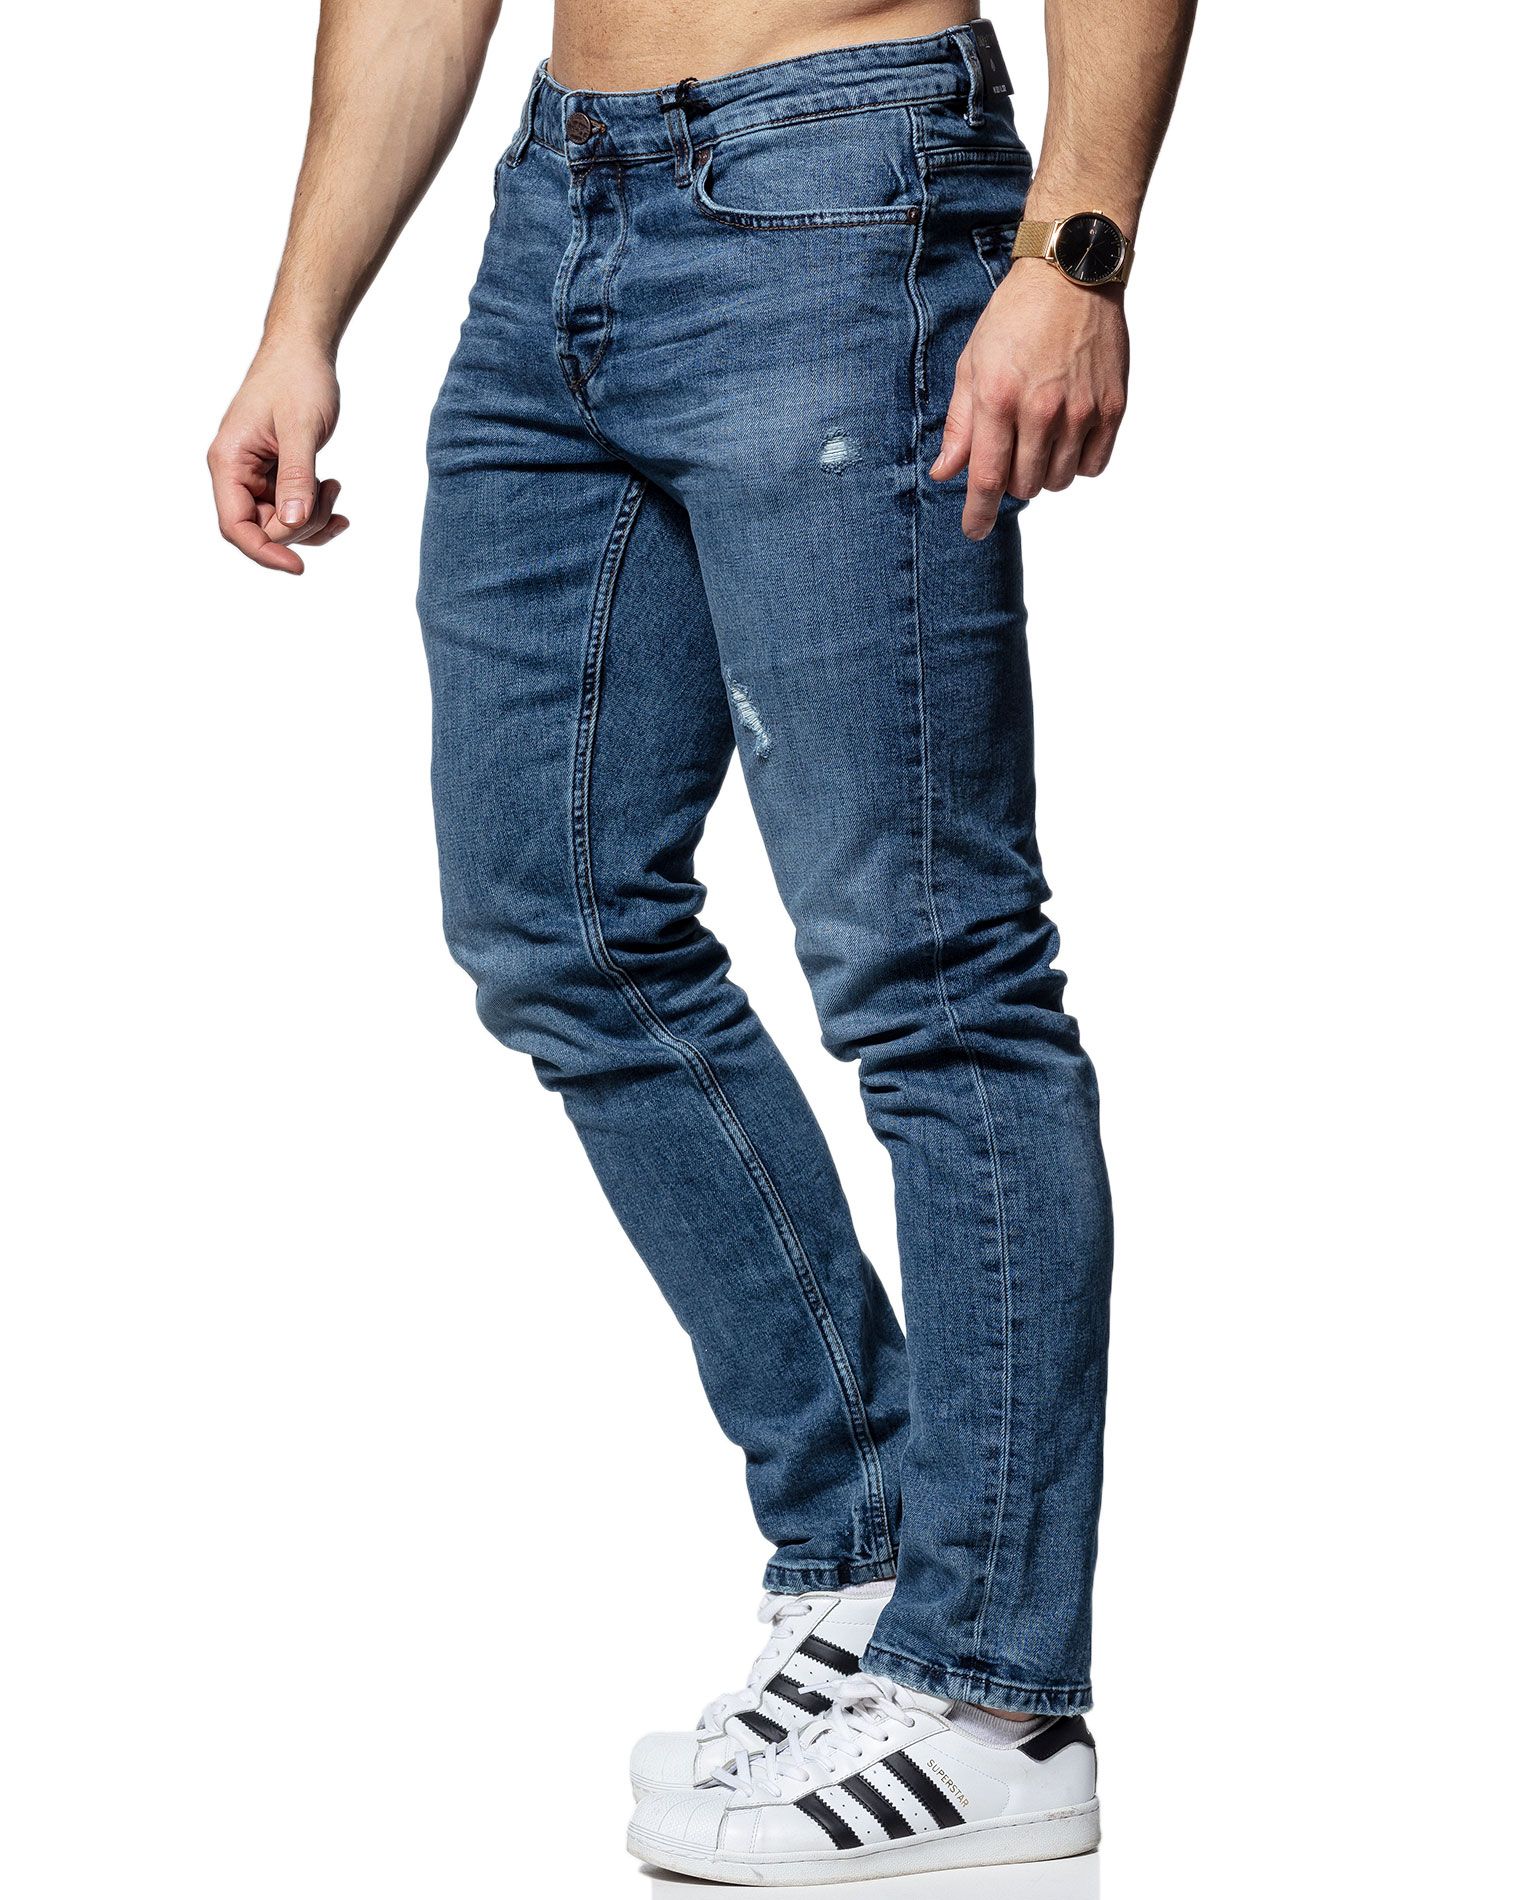 Loom Italian Candiani Jeans L32 Only & Sons - 4863 - Jeans - Jerone.com